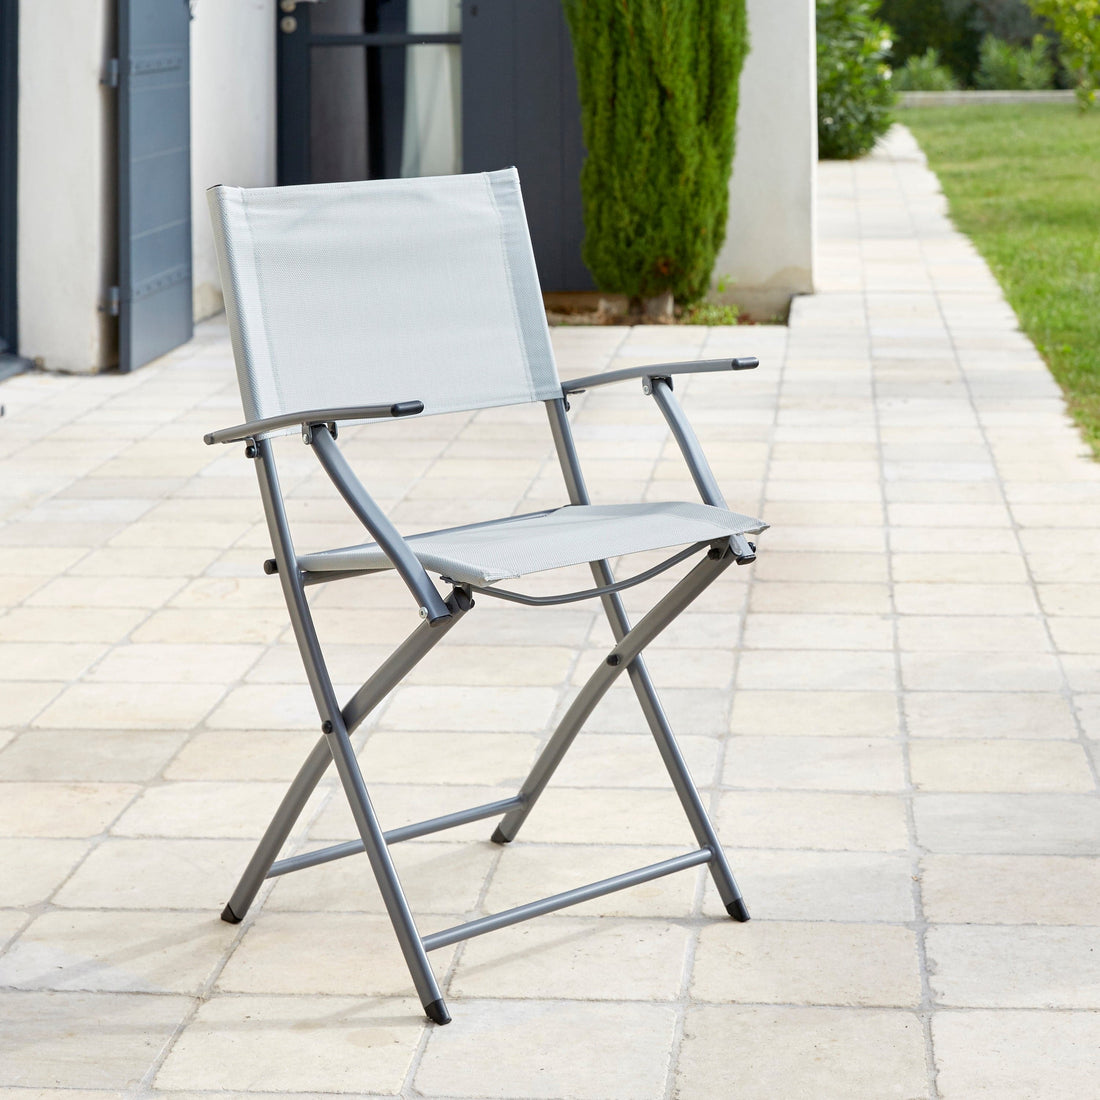 EMYS NATERIAL FOLDING STEEL CHAIR WITH ARMRESTS TEXTILENE SEAT GREY 52X54XH83